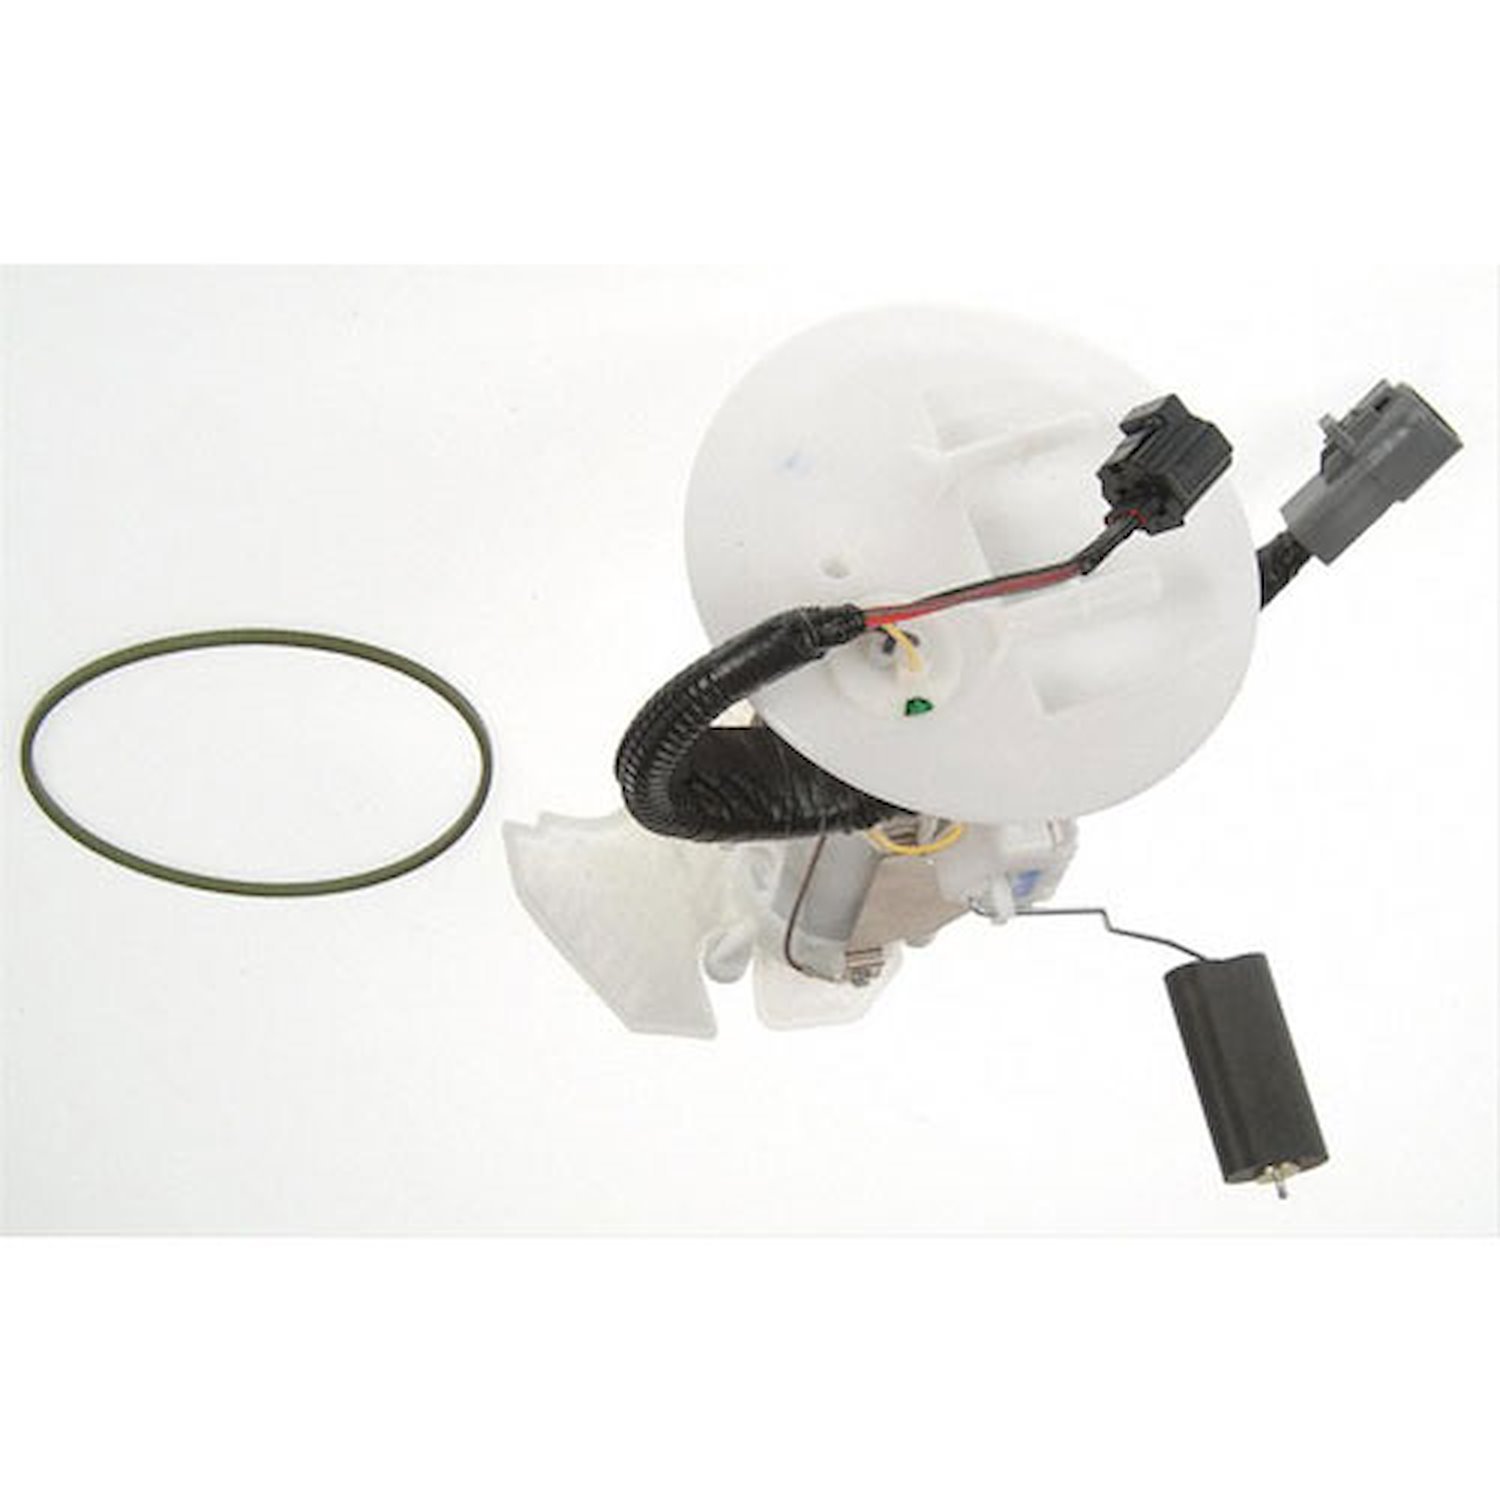 OE Ford Replacement Electric Fuel Pump Module Assembly 2003 Ford Explorer 4.0L V6